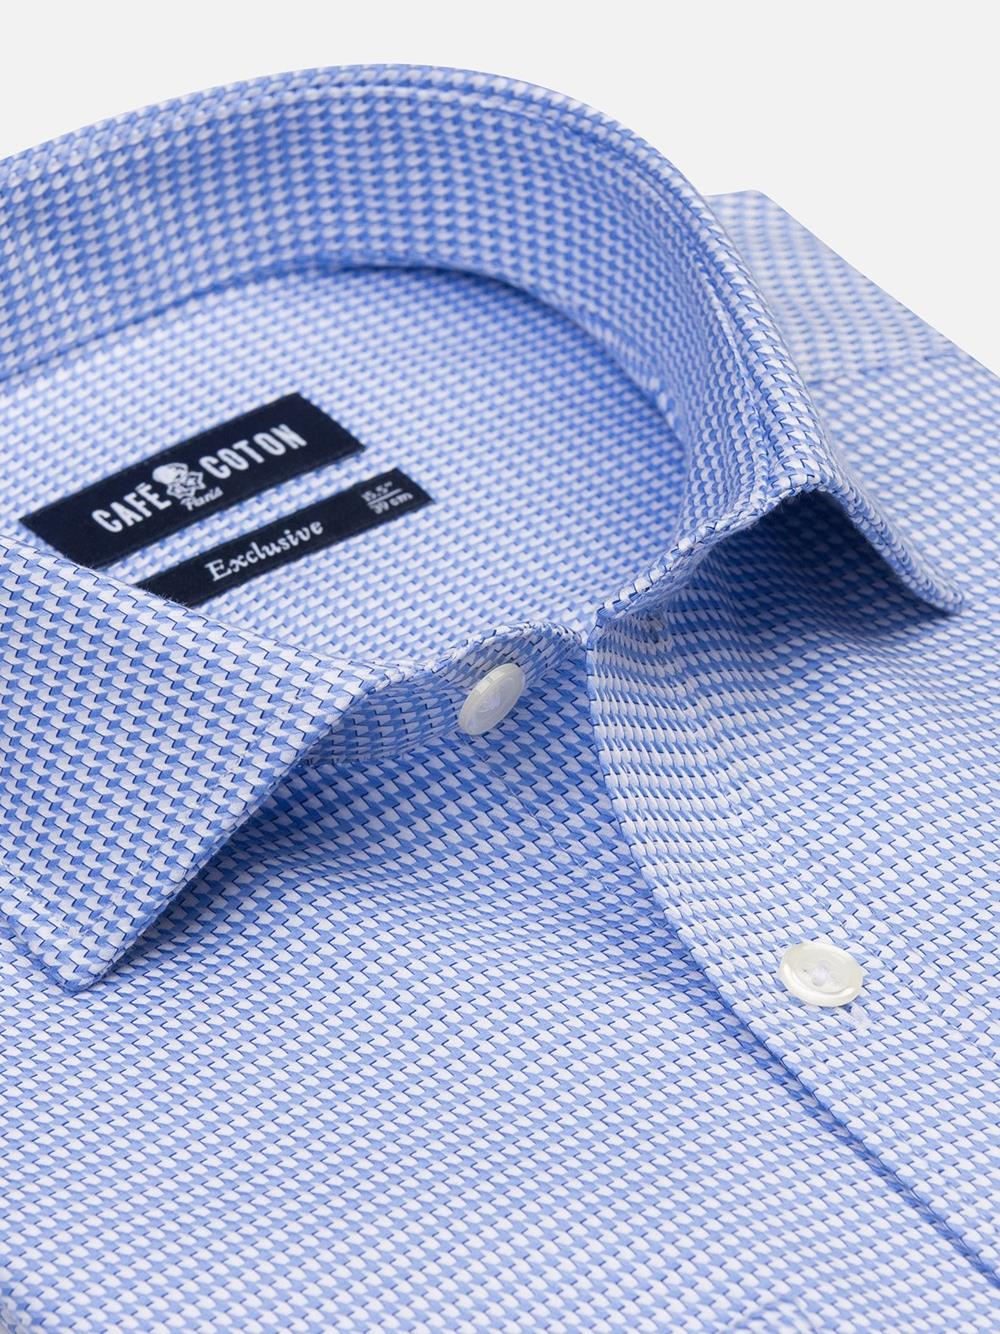 Willy sky blue twill slim fit shirt - Musketeer cuffs